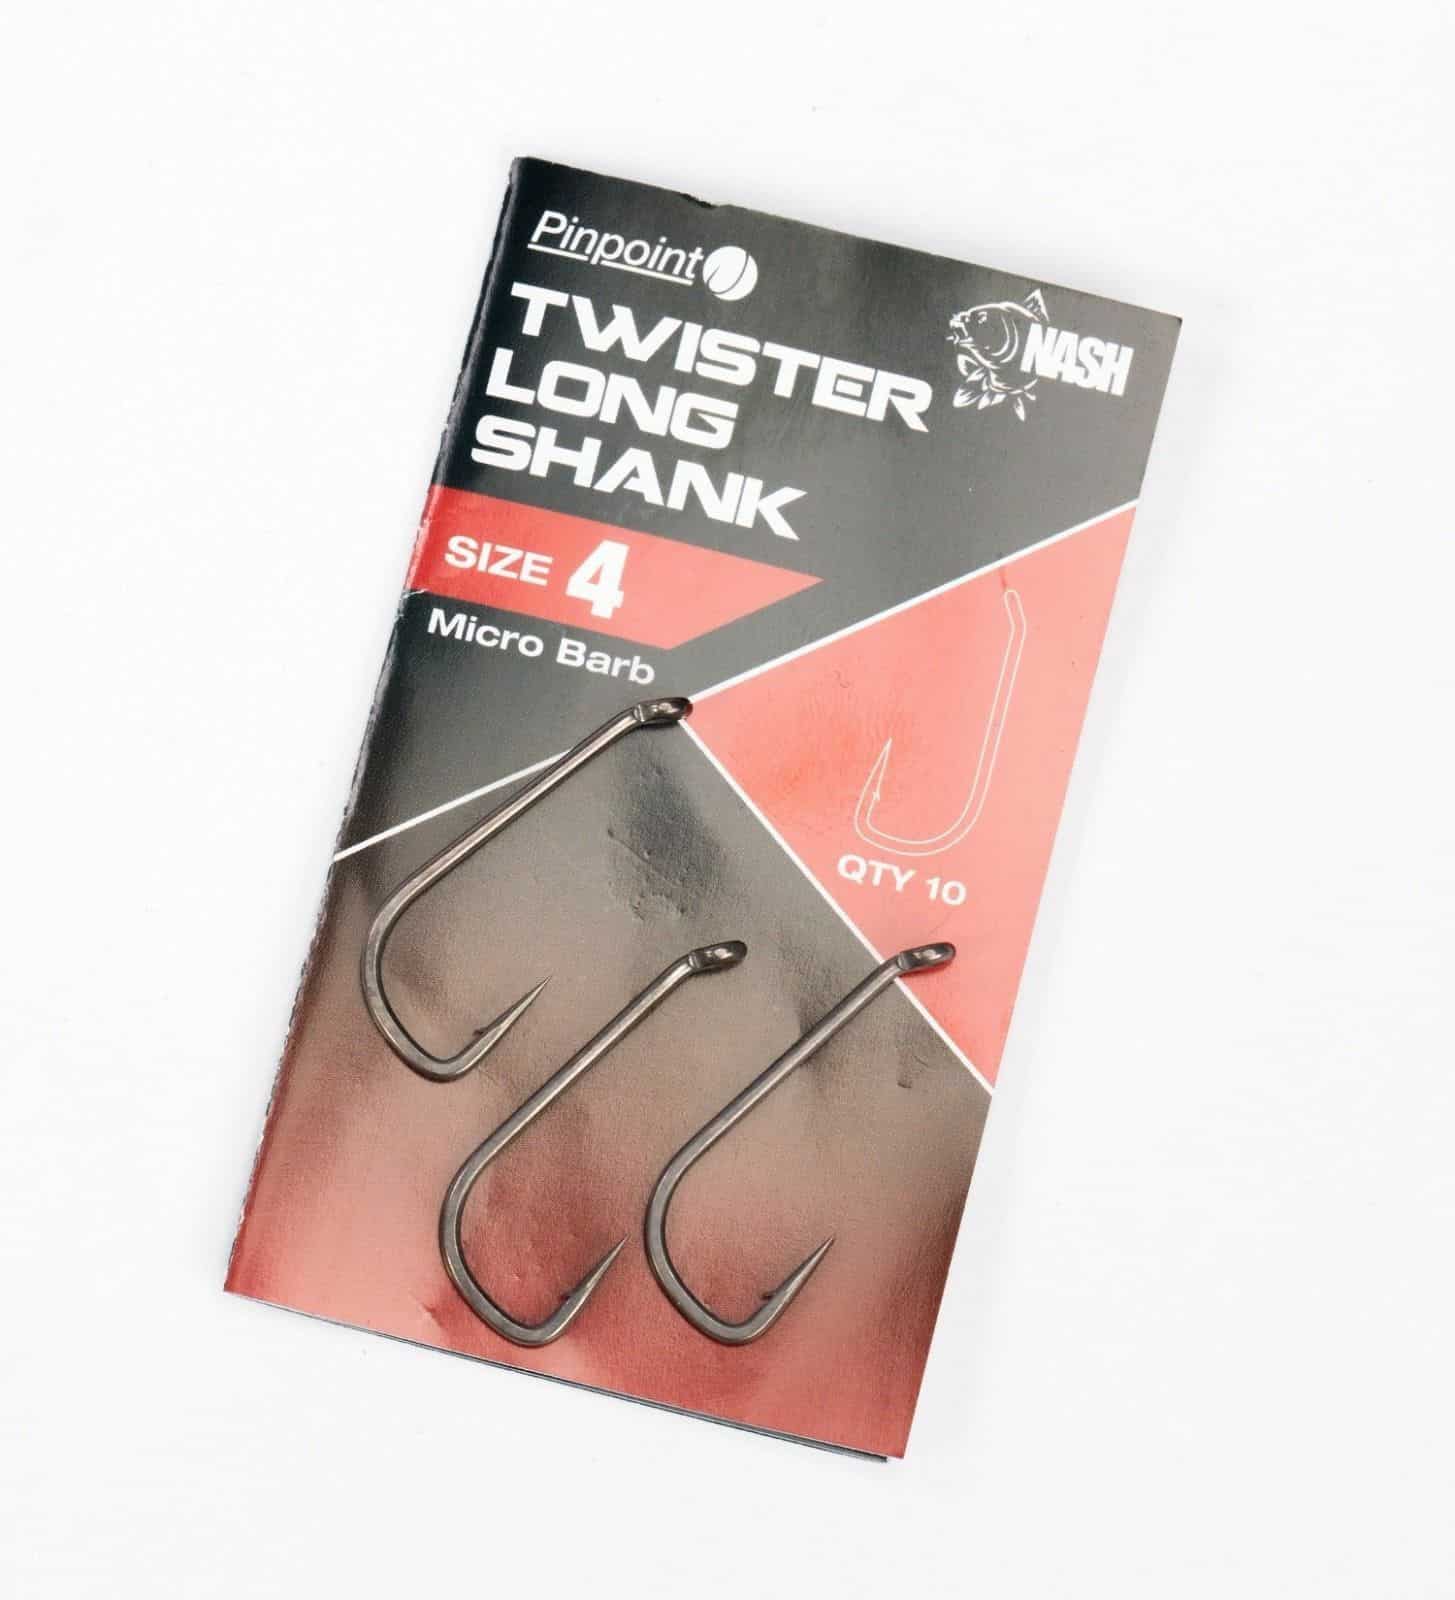 https://www.c2kft.co.uk/wp-content/uploads/imported/0/Nash-New-PinpointClaw-Flota-Chod-TwisterFang-X-Claw-Hooks-Acc-174144499540-4.JPG